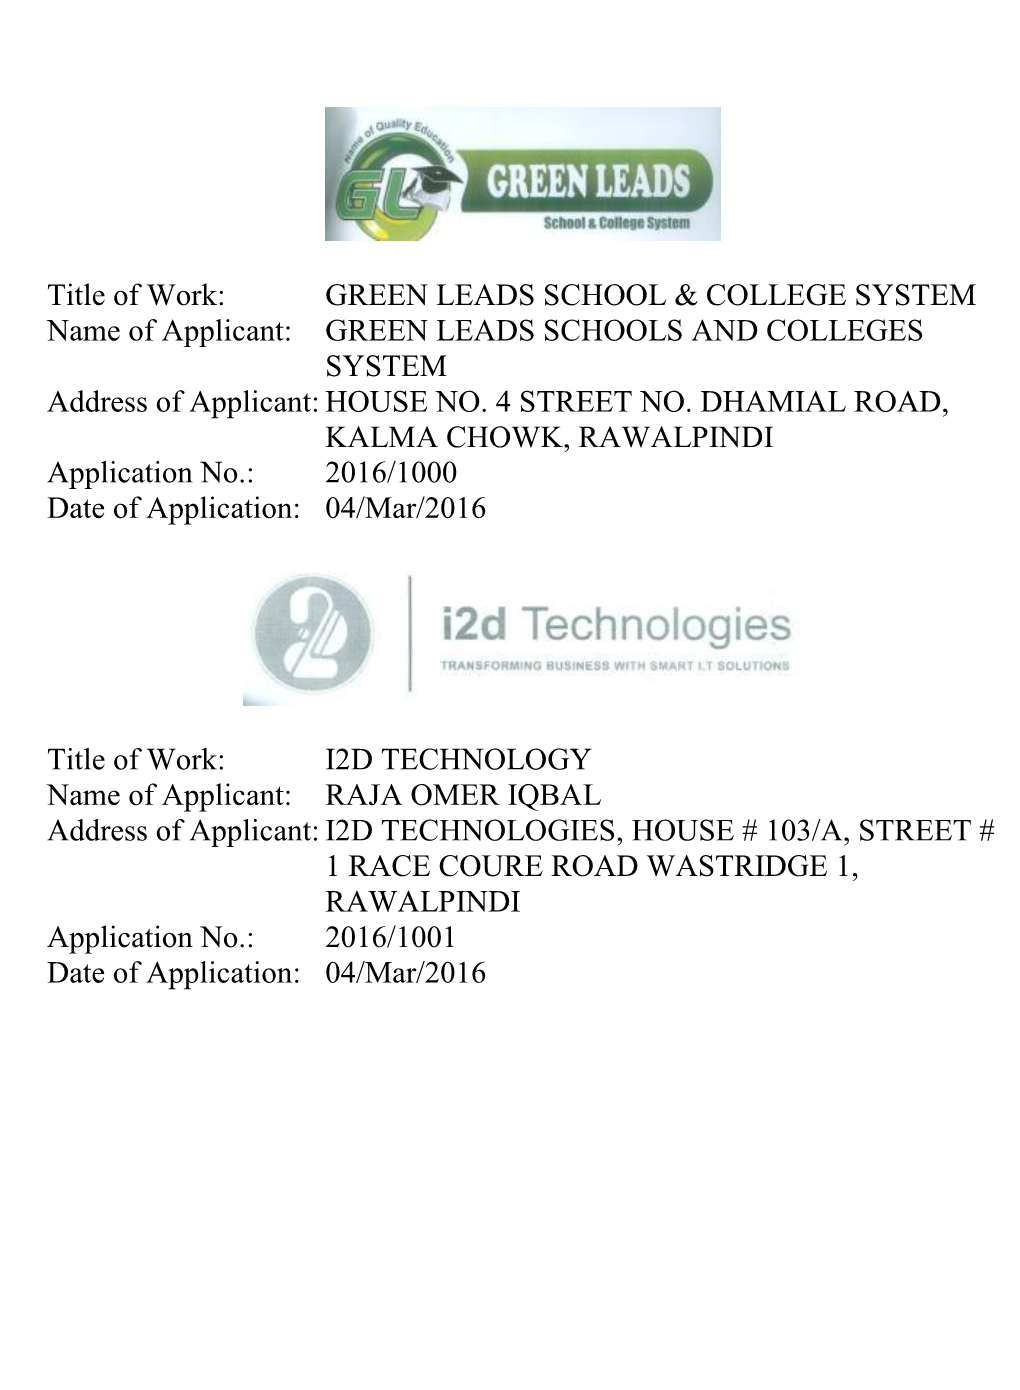 Title of Work: GREEN LEADS SCHOOL & COLLEGE SYSTEM